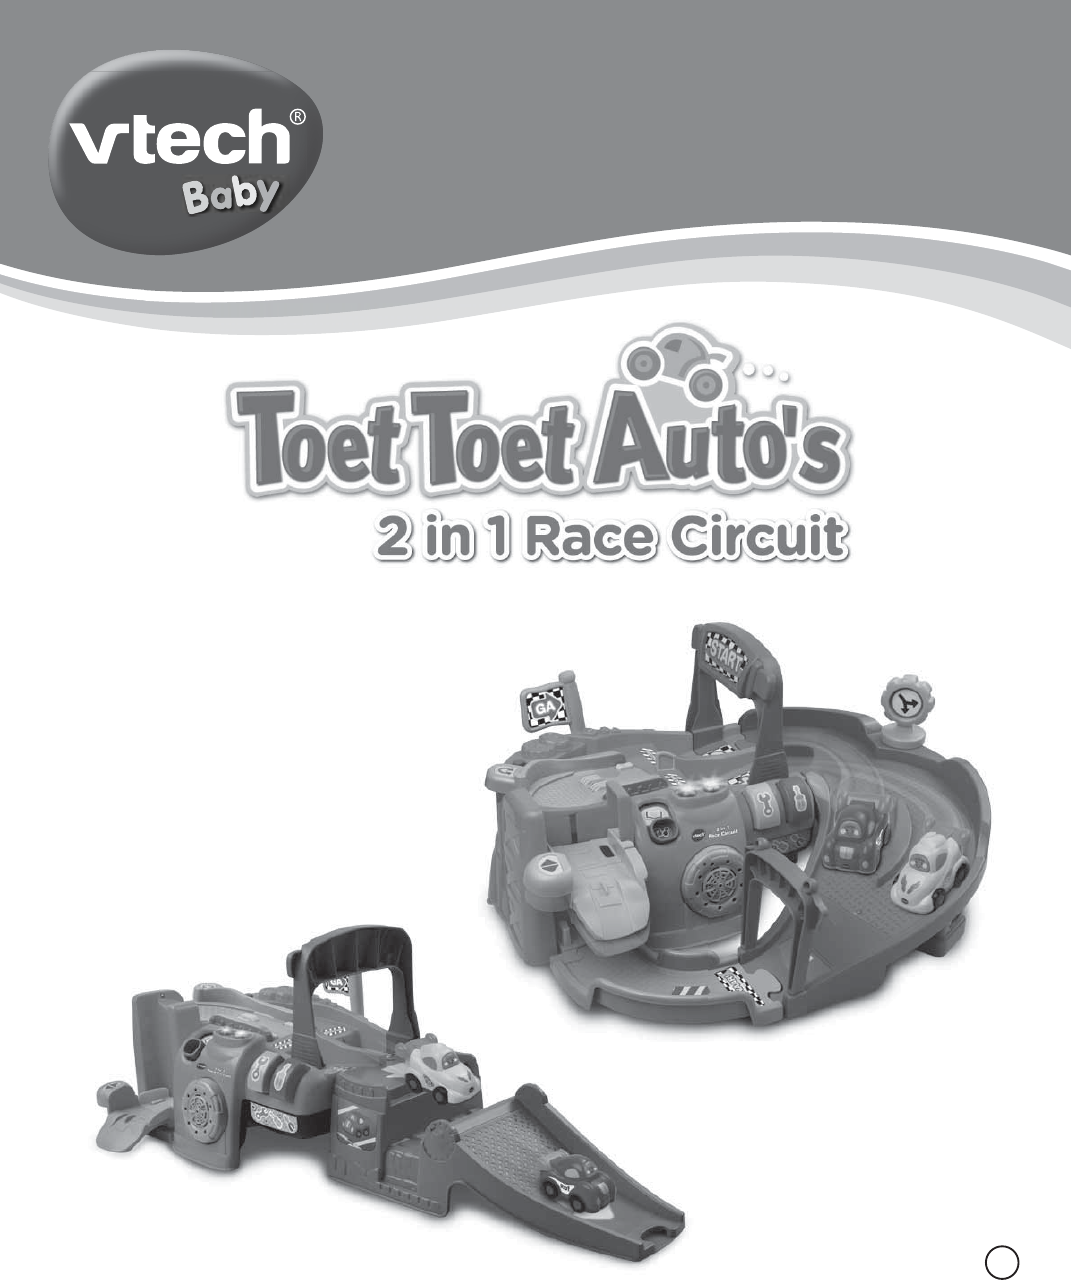 Tahiti Saga Oven Manual VTech Toet Toet Auto s 2 in 1 Race Circuit (page 1 of 14) (Dutch)